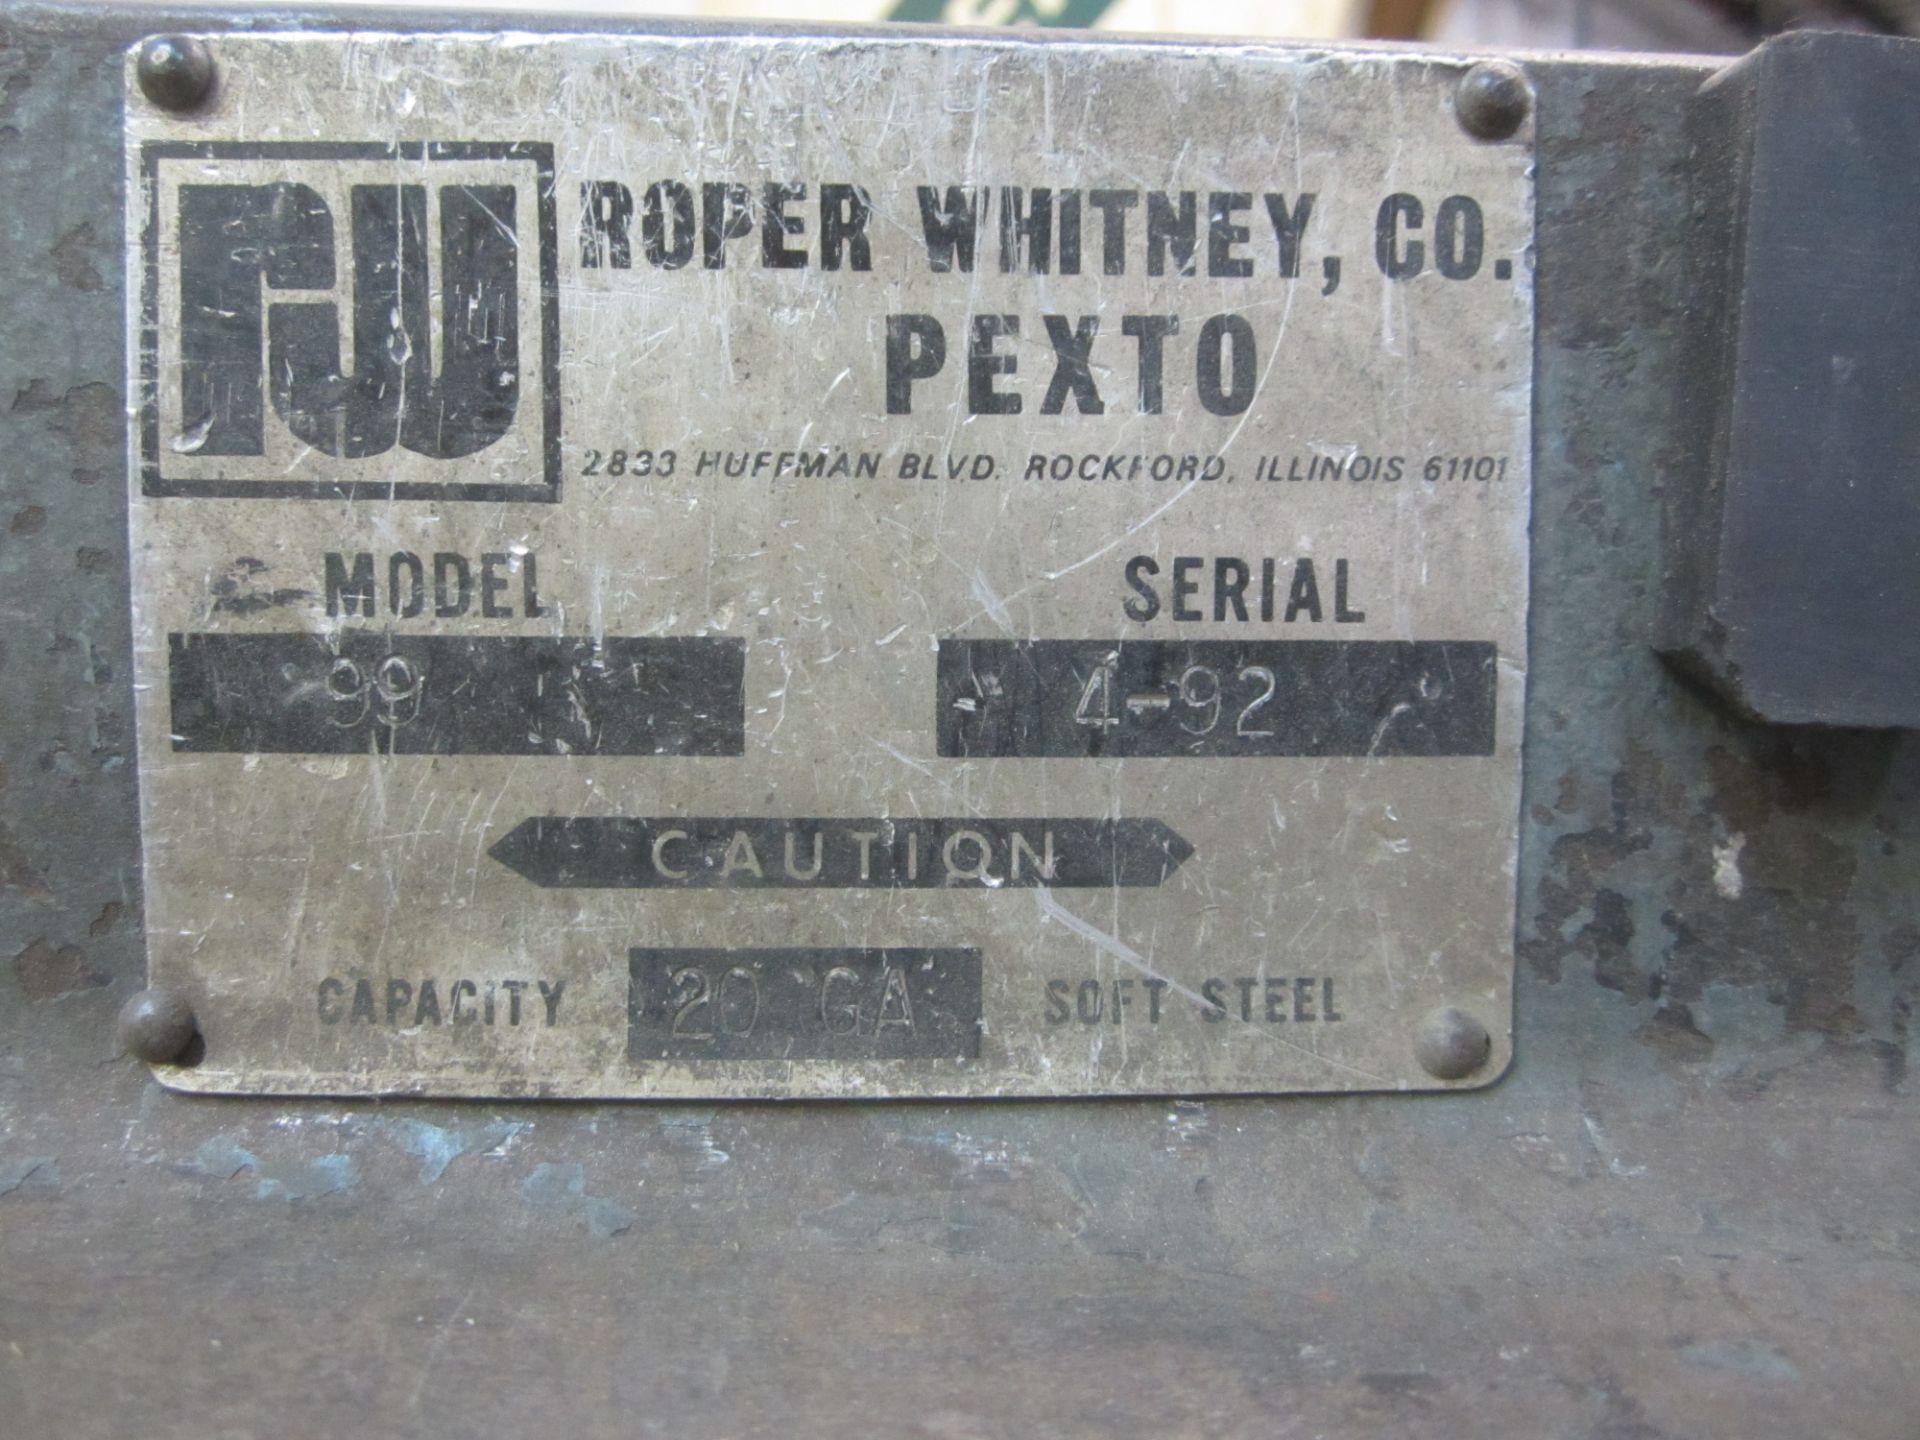 Roper Whitney/Pexto Model 99 Letter Forming Hand Brake, with Stand, s/n 4-92, 12" X 20 Gauge - Image 2 of 2